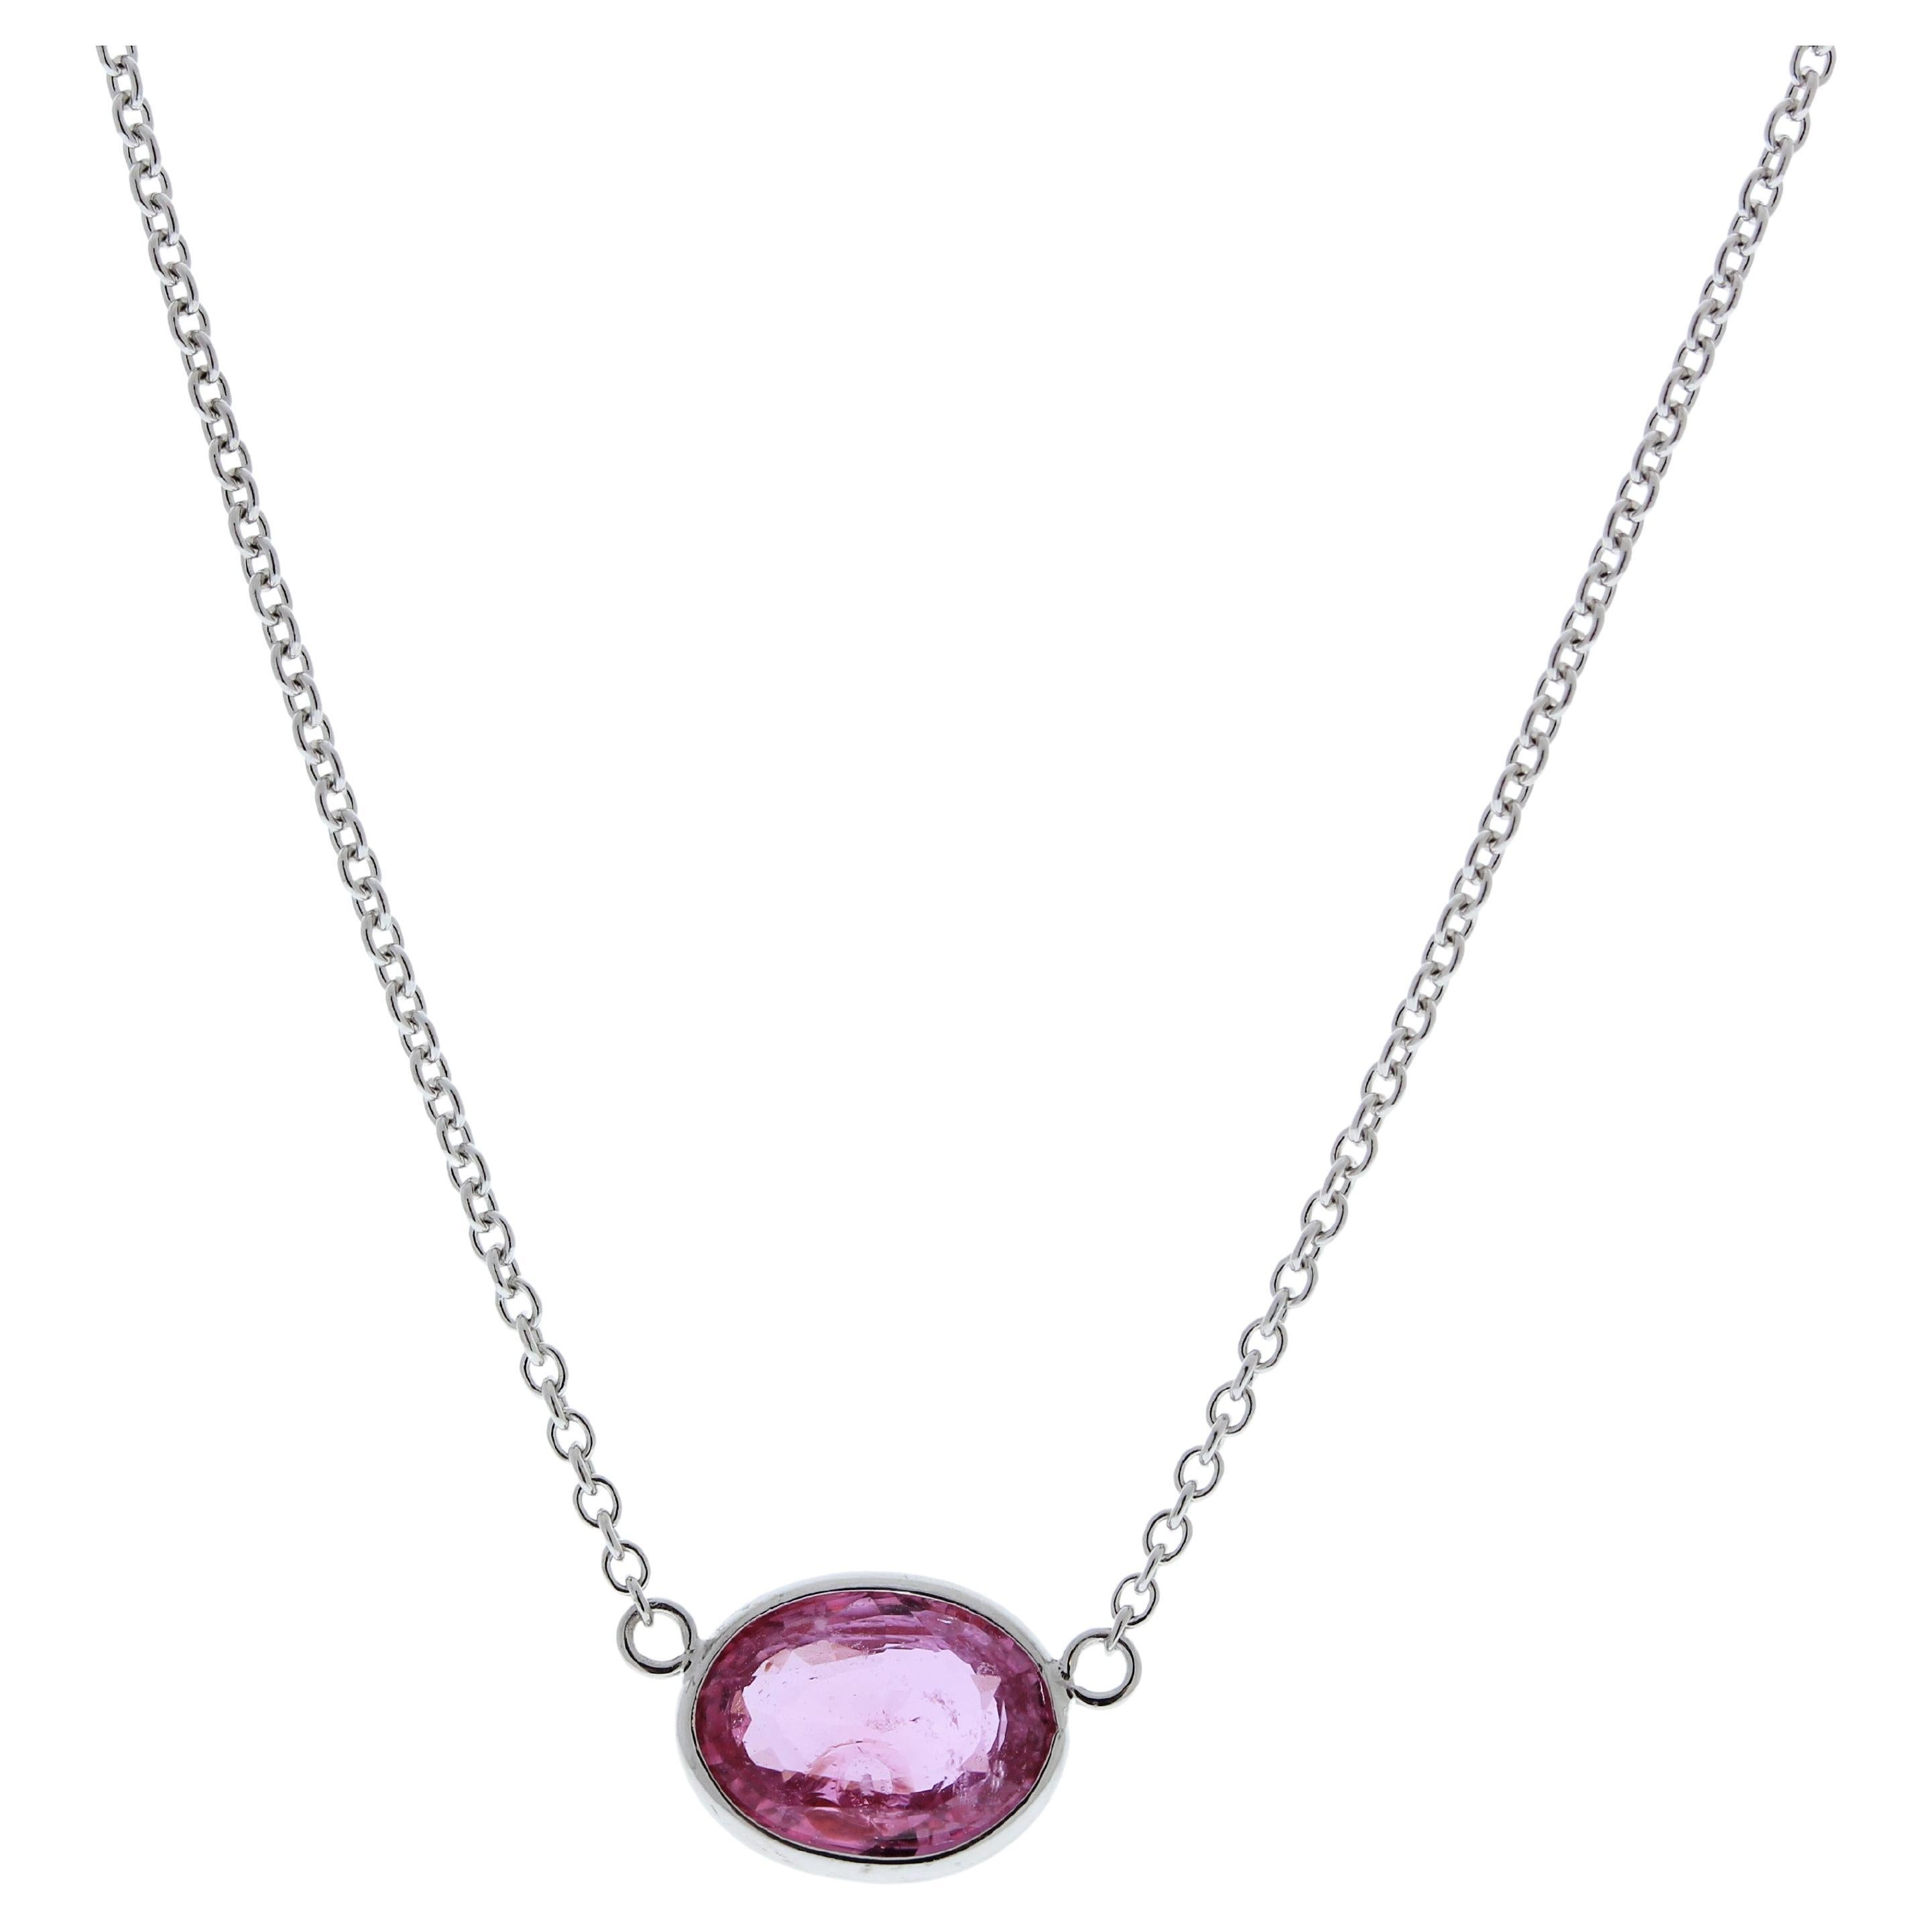 2.15 Carat Oval Padparadschah Pink Fashion Necklaces In 14k White Gold For Sale